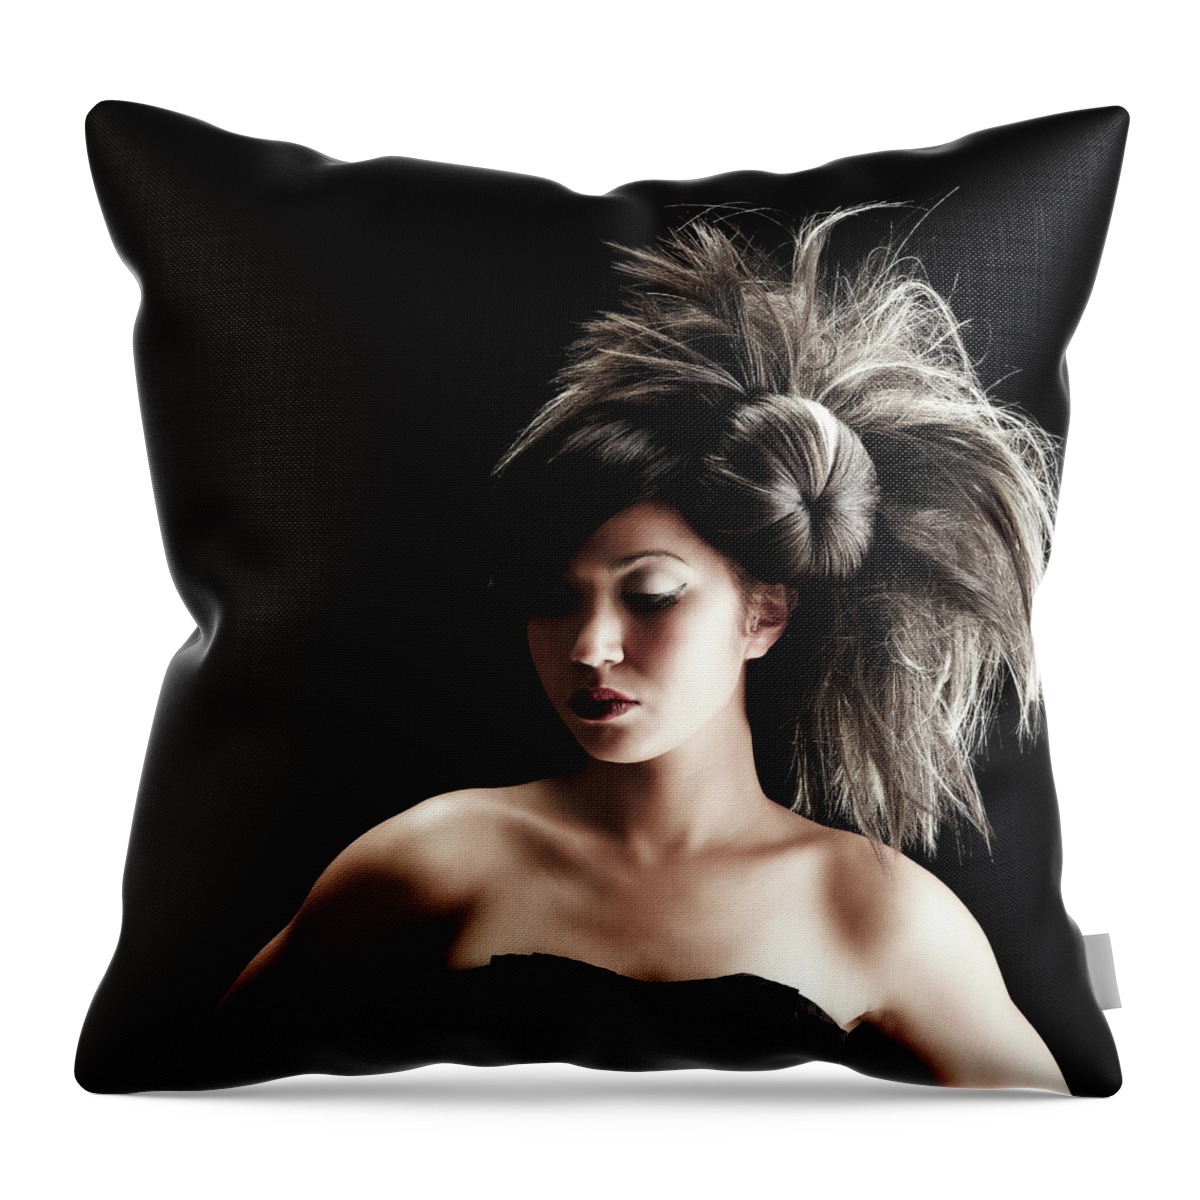 Cool Attitude Throw Pillow featuring the photograph Young Adult Female With Eyes Closed And by Gspictures